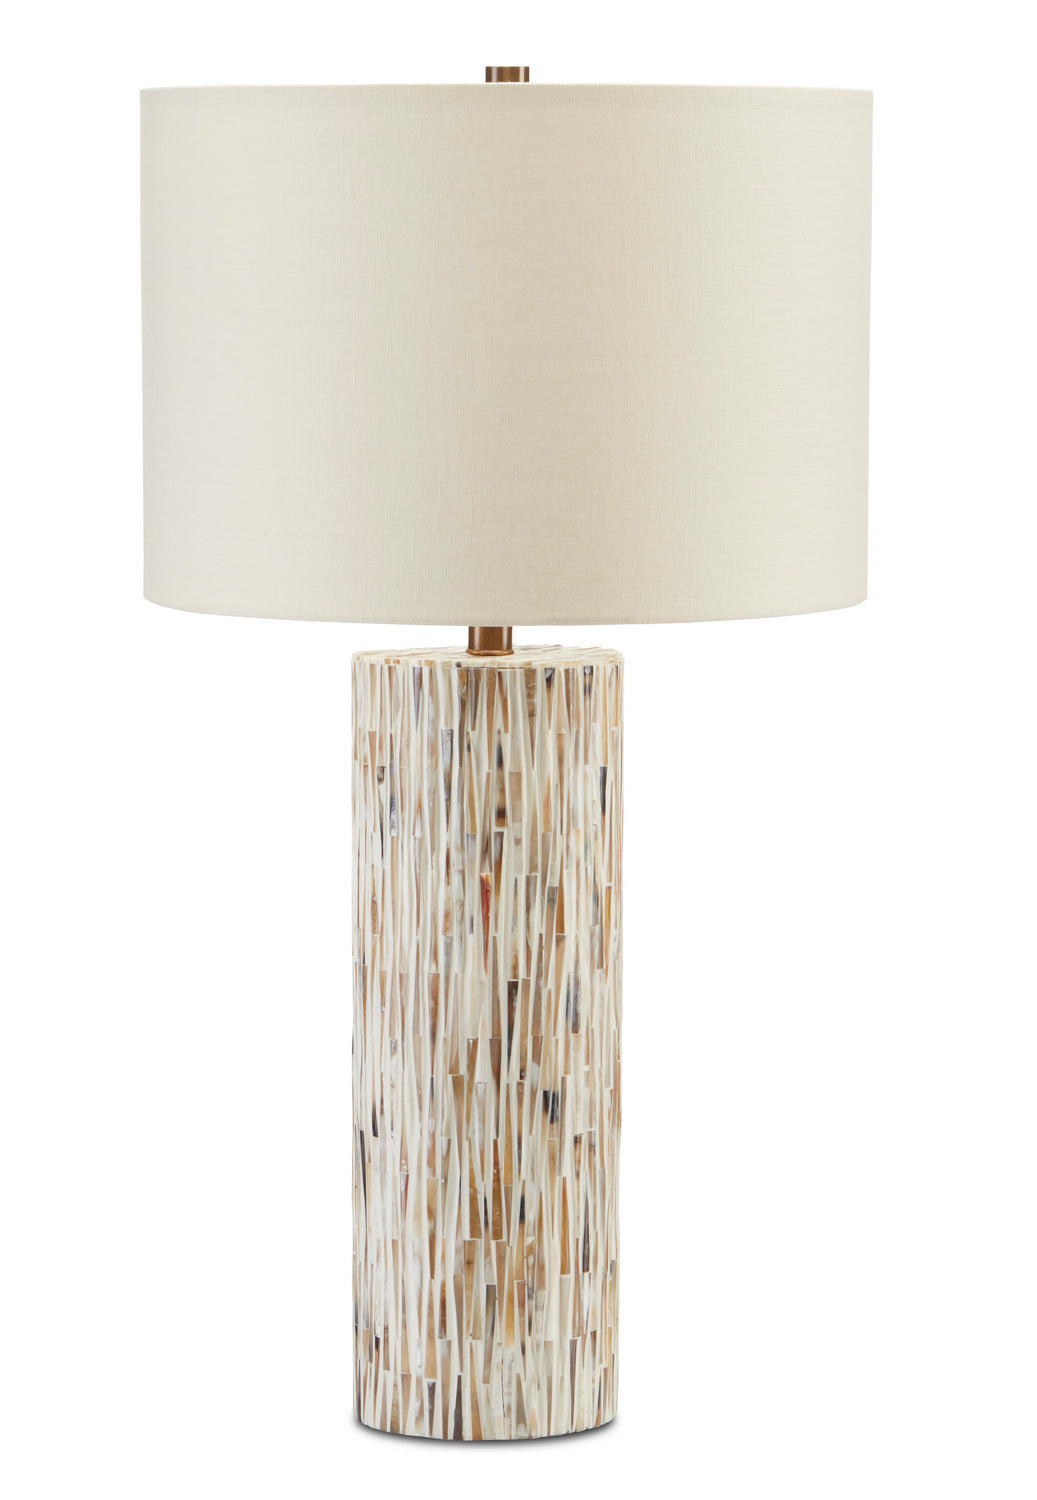 One Light Table Lamp from the Aquila collection in Natural Bone/Antique Brass finish